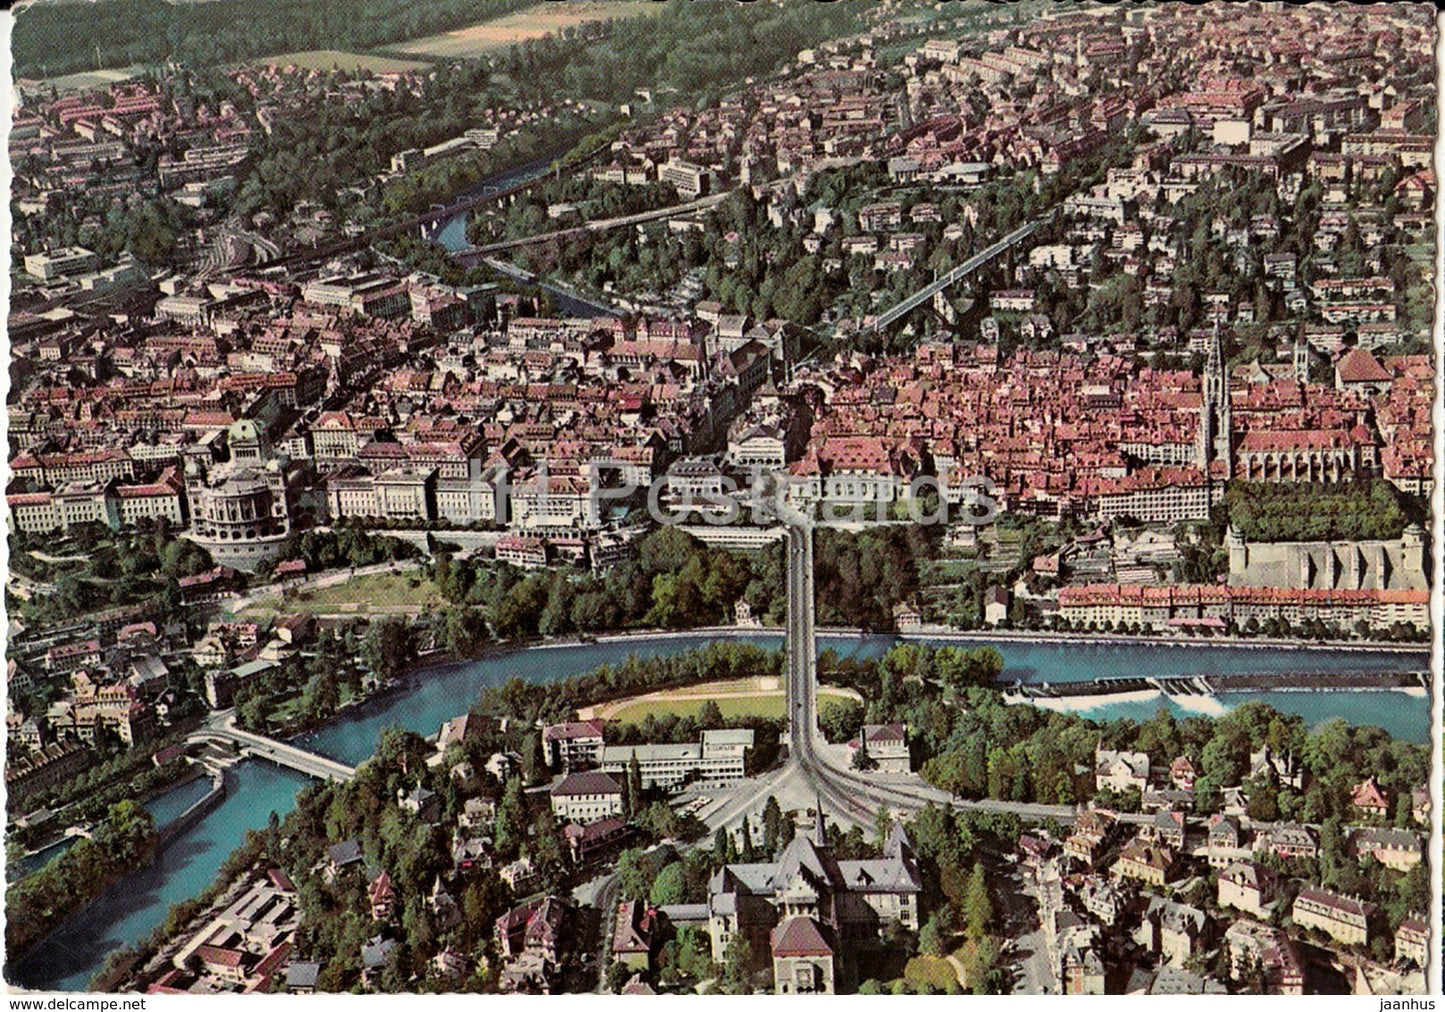 Bern - City Center - aerial view - Switzerland - 1964 - used - JH Postcards